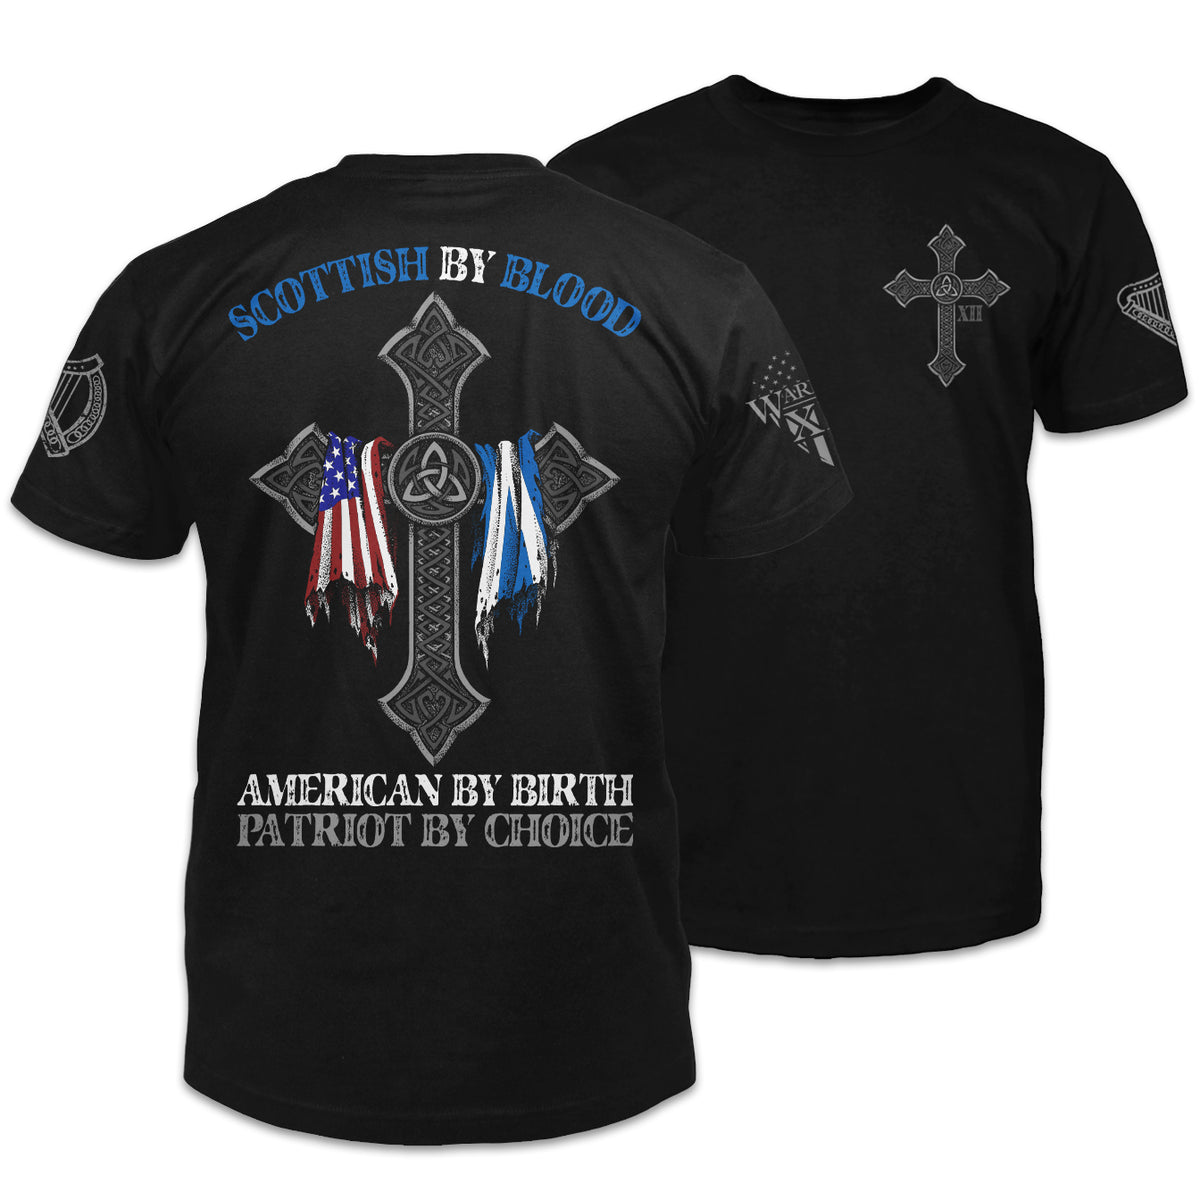 Front and back black t-shirt with the words "Scottish by blood, American by birth, patriot by choice" with a cross holding the American and Scottish flag printed on the shirt.